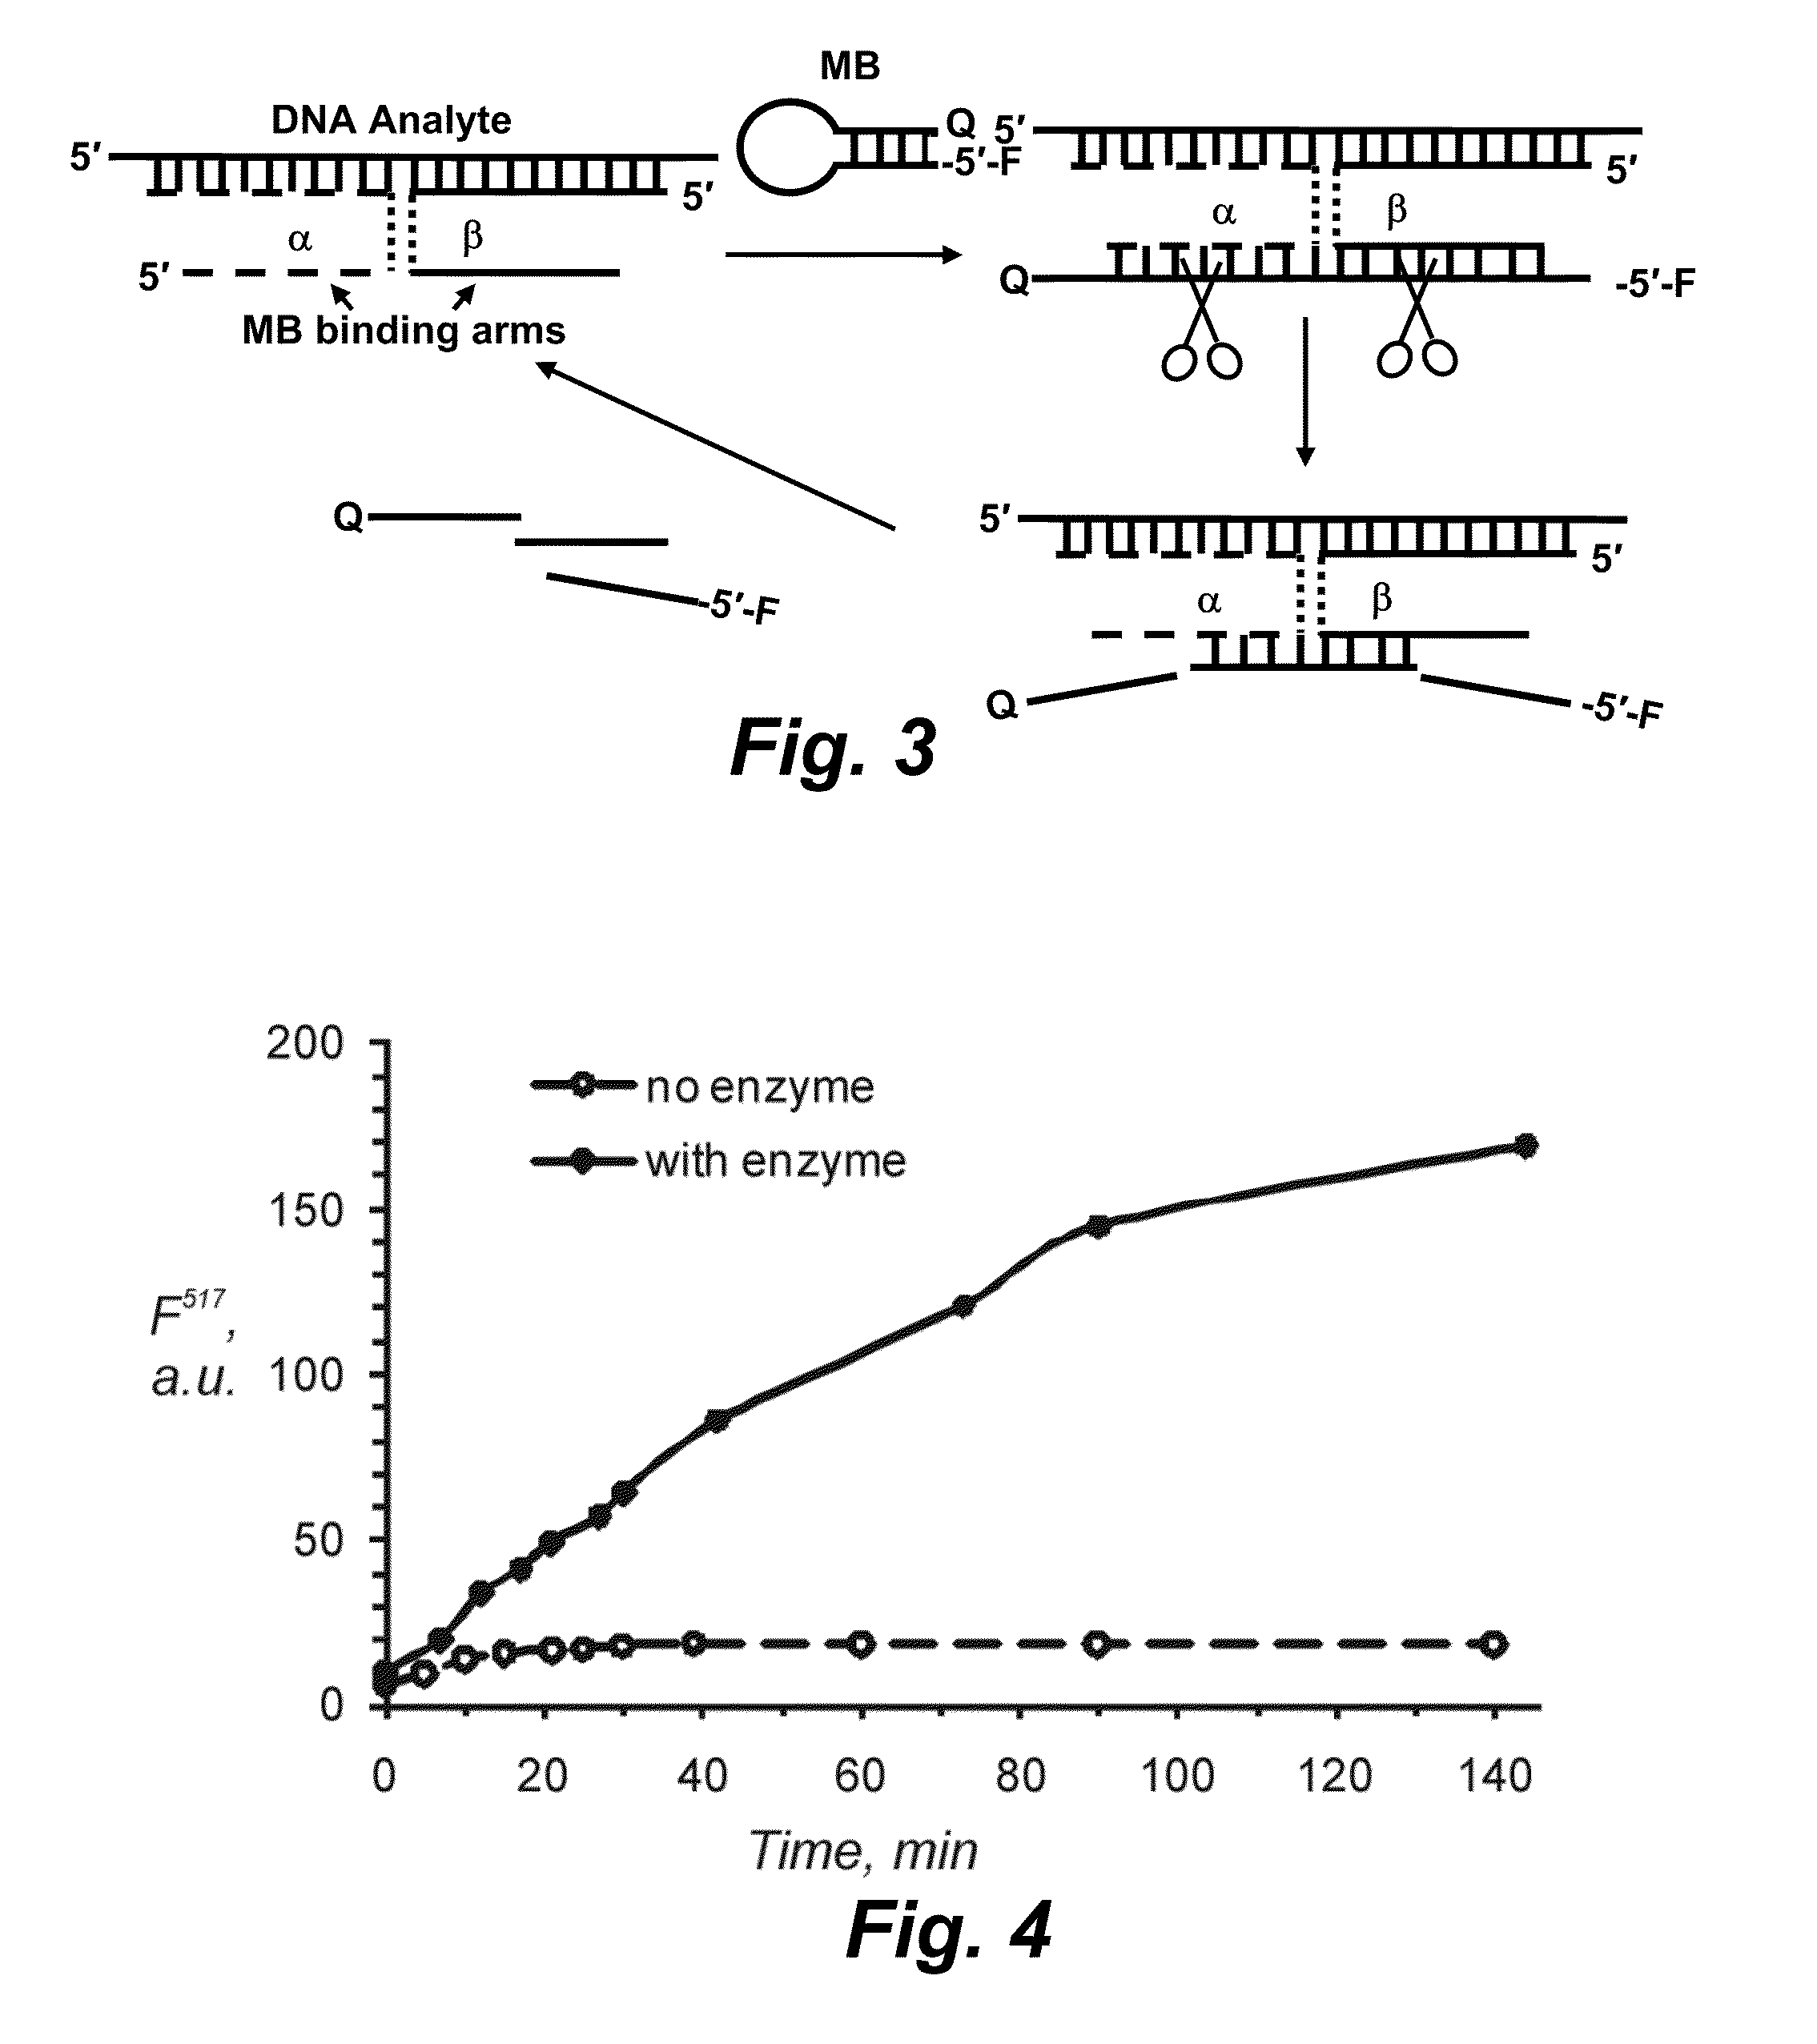 Binary probe system for sensitive detection of target analytes